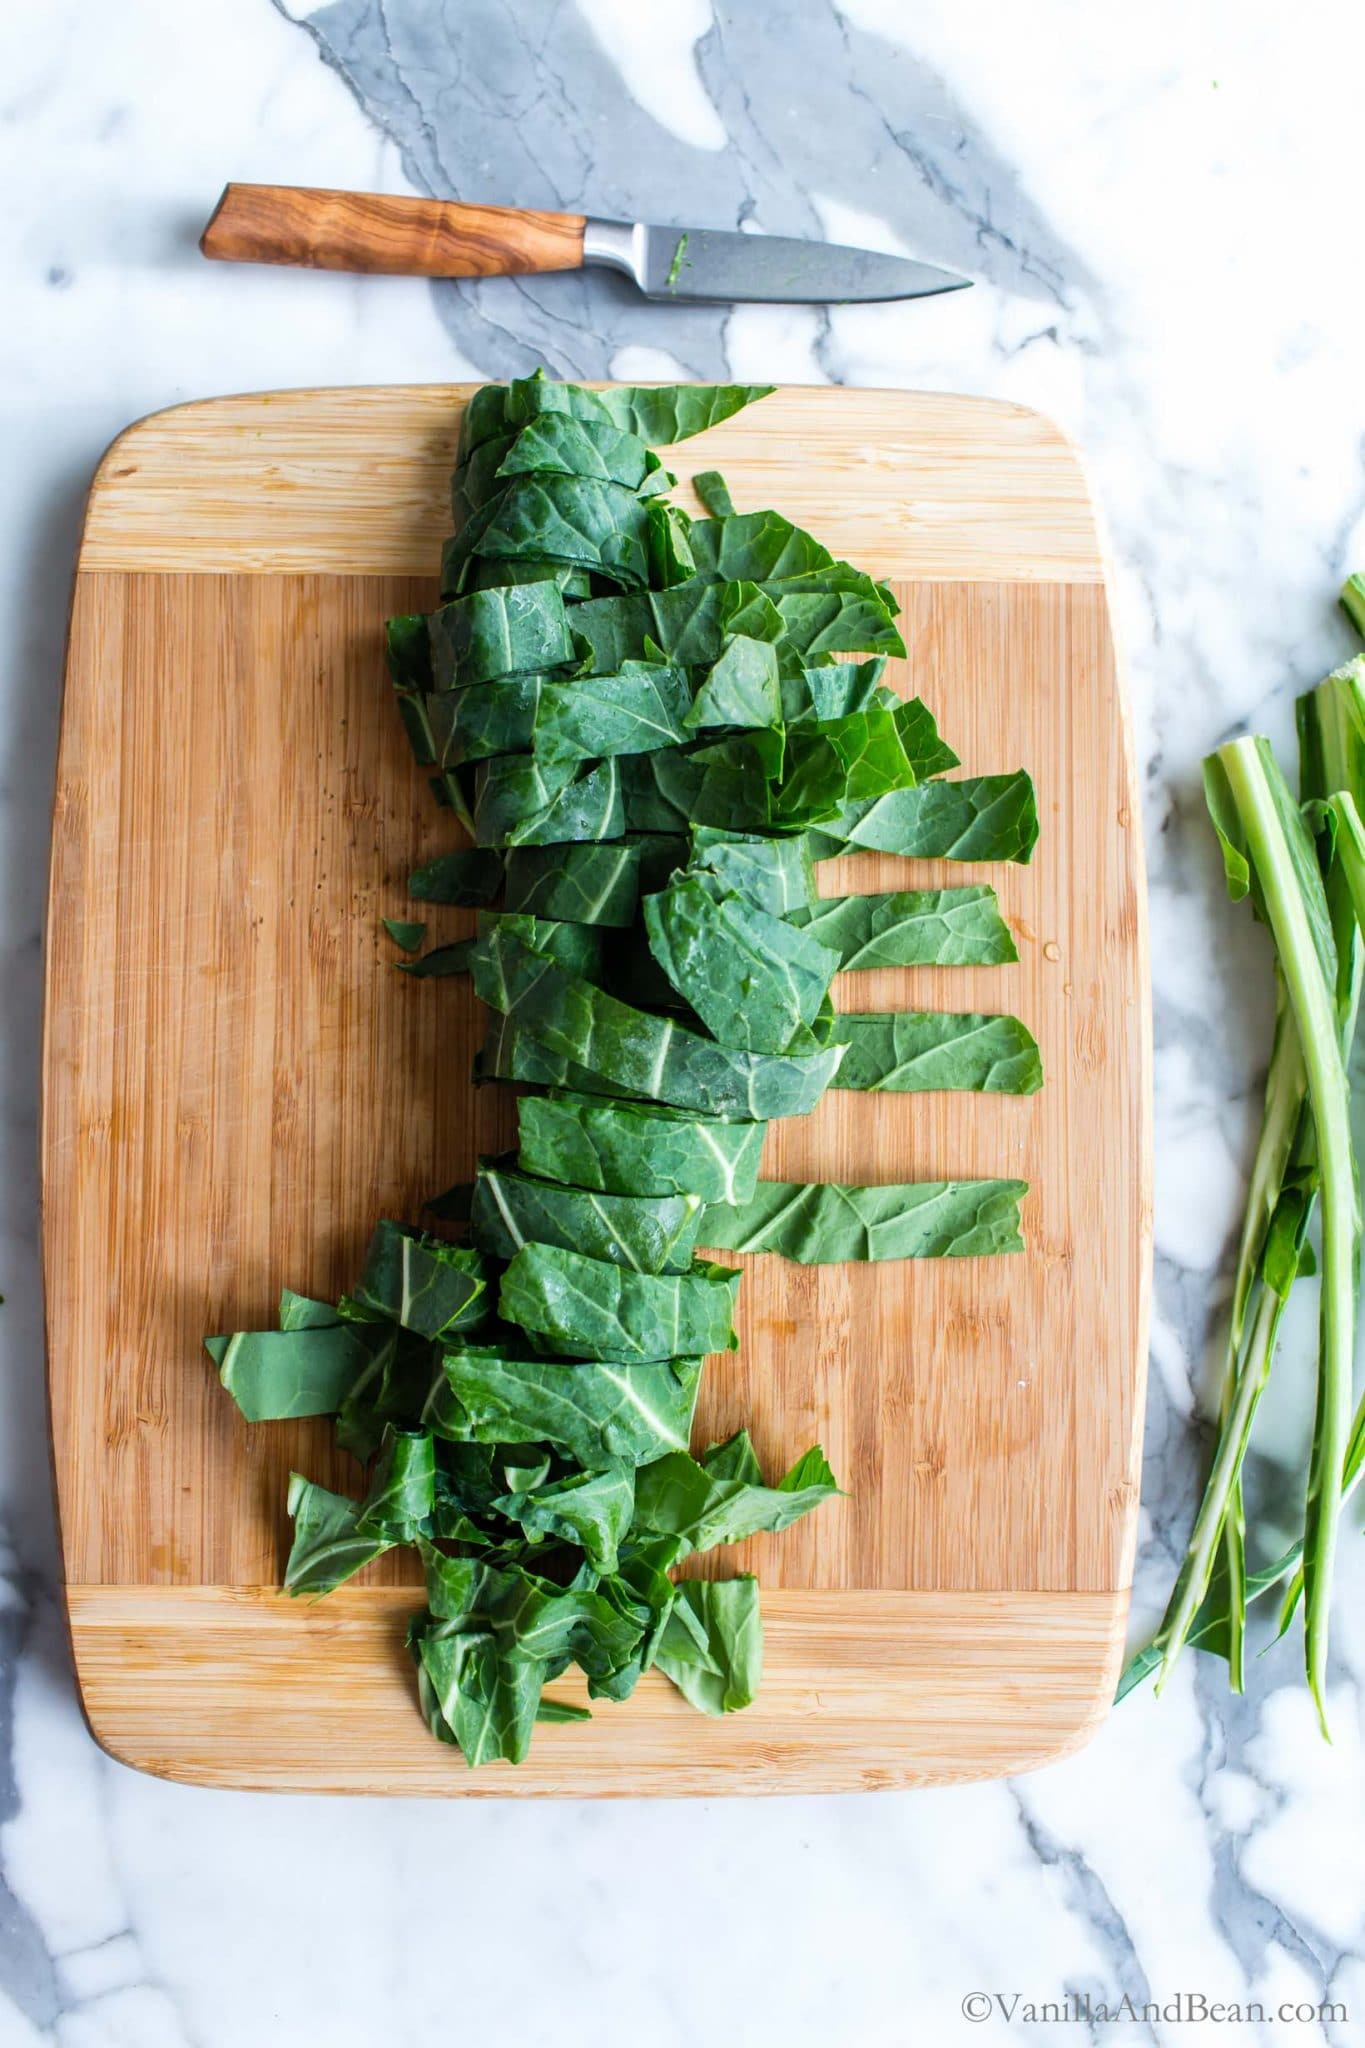 Cutting the collard greens into ribbons on a cutting board.